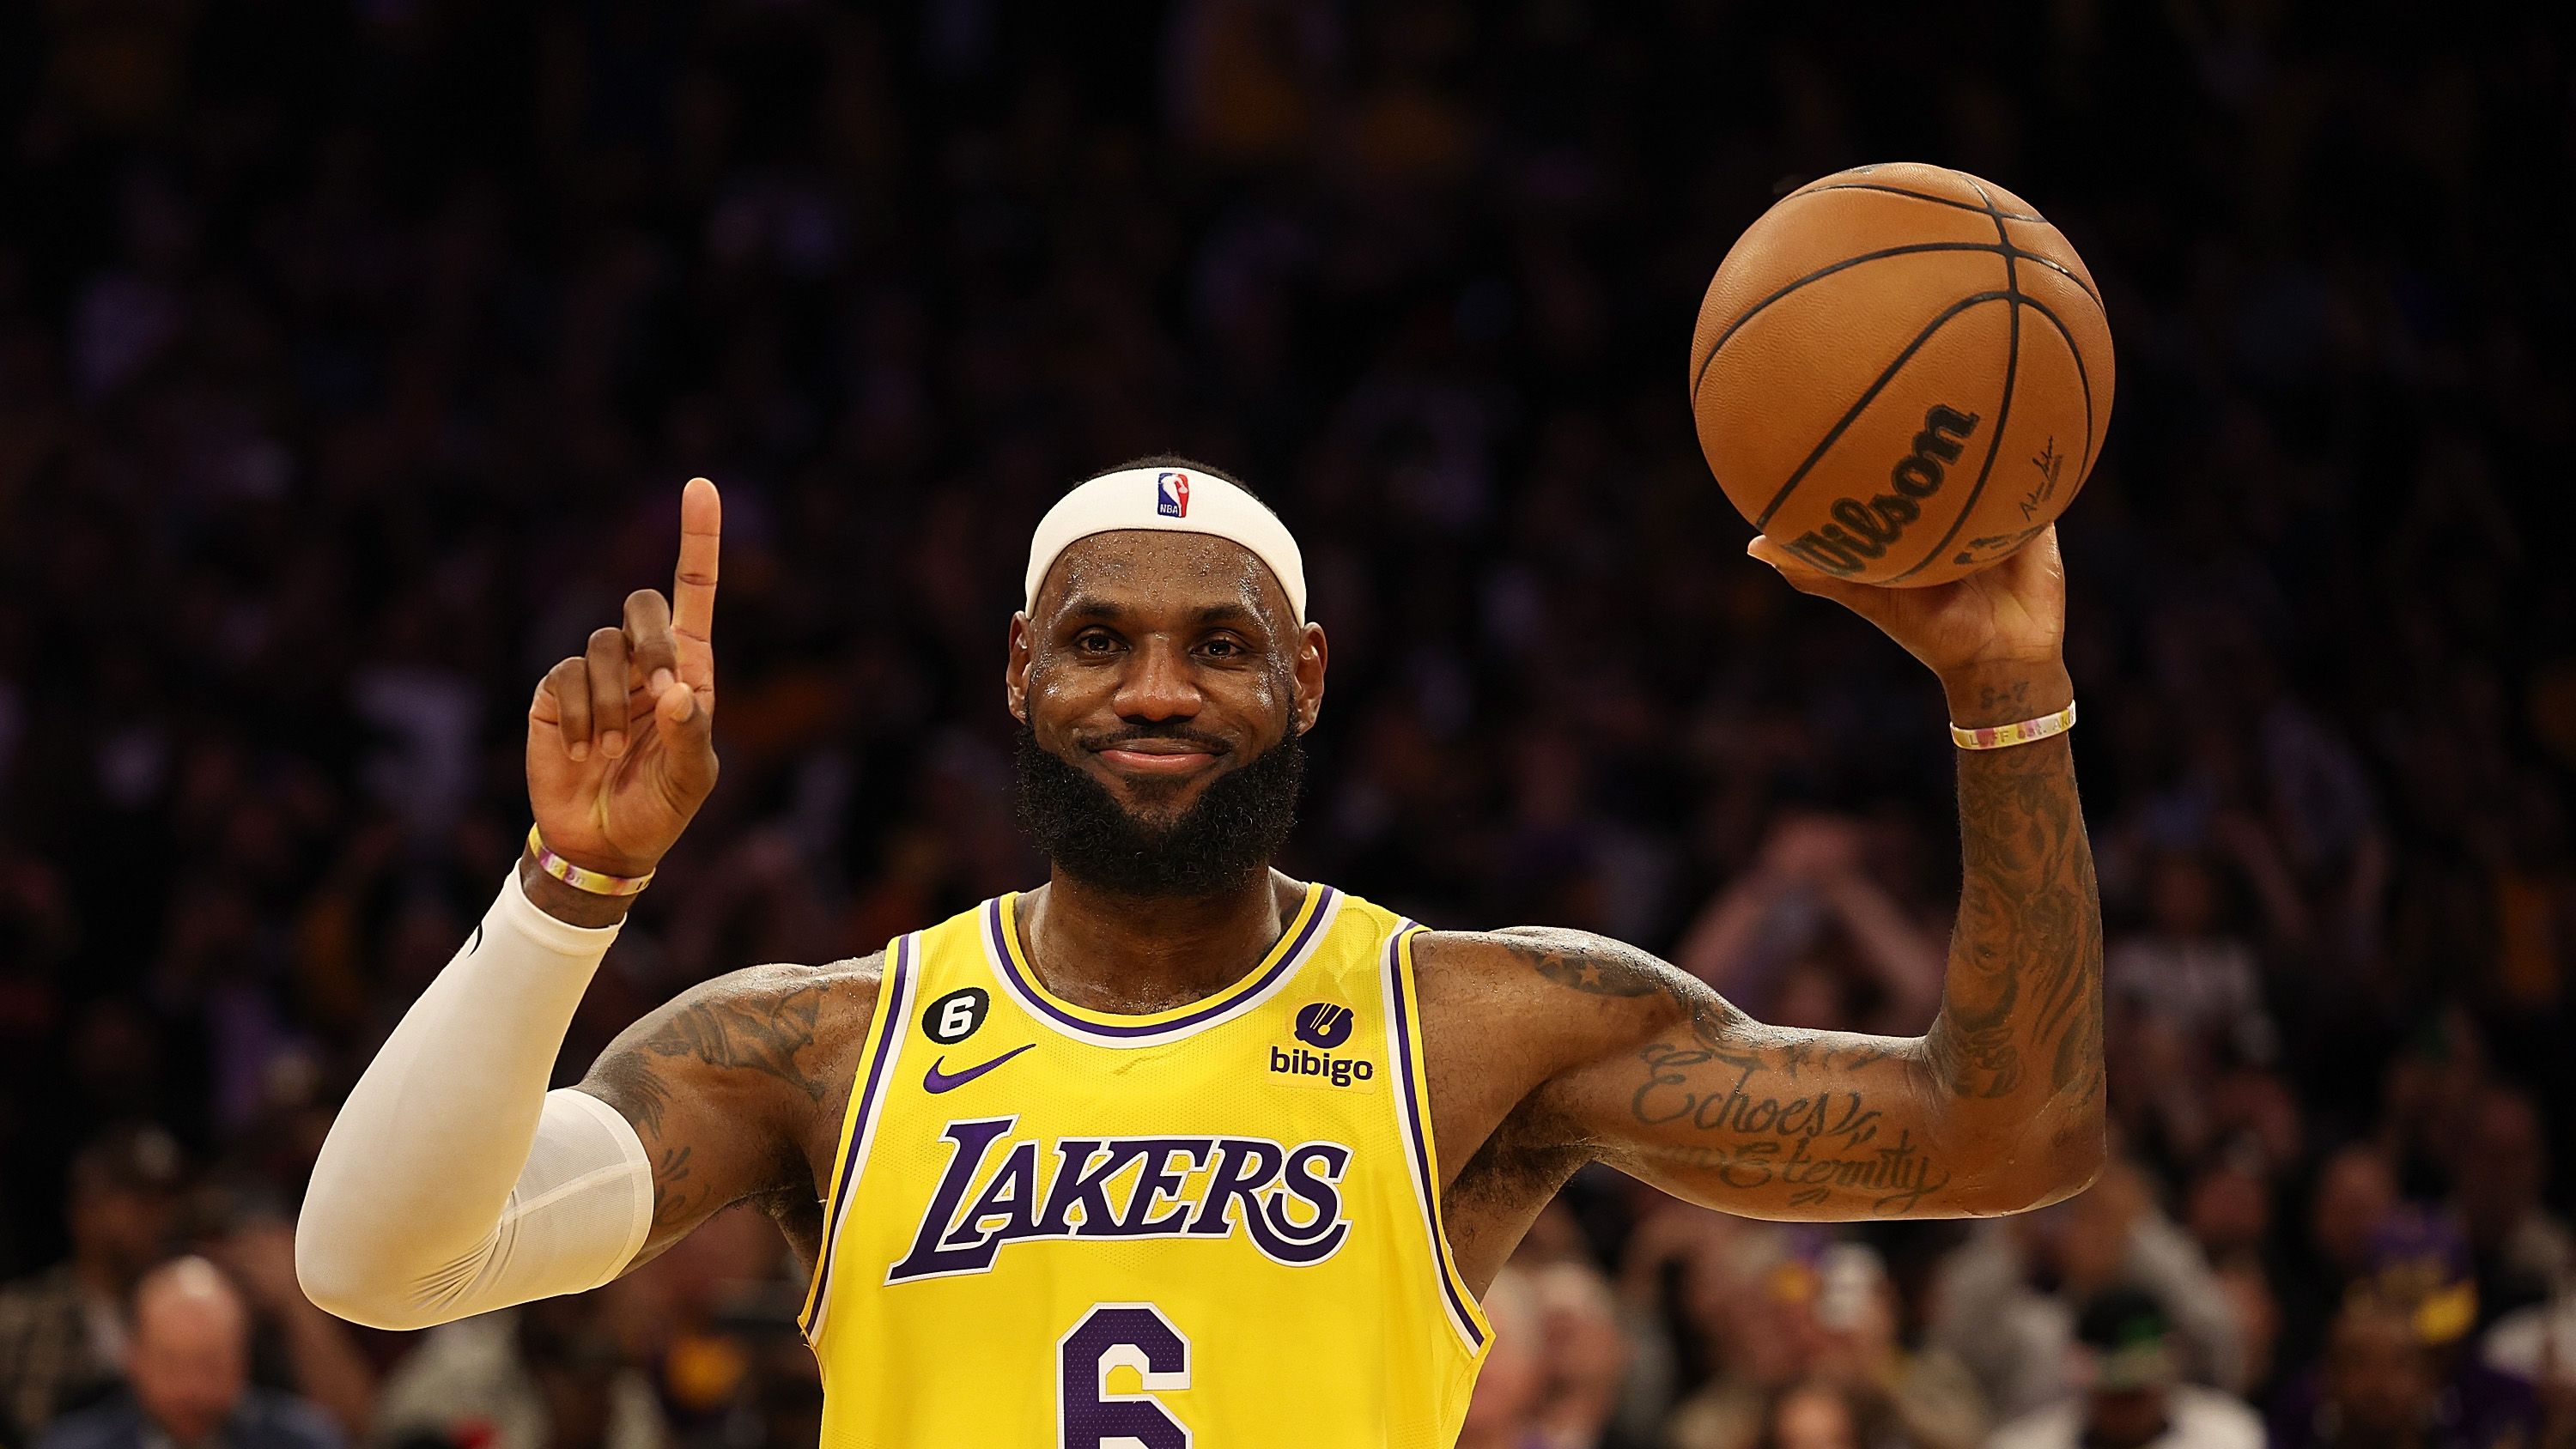 How does NBA star LeBron James spend his millions? He bought Thom